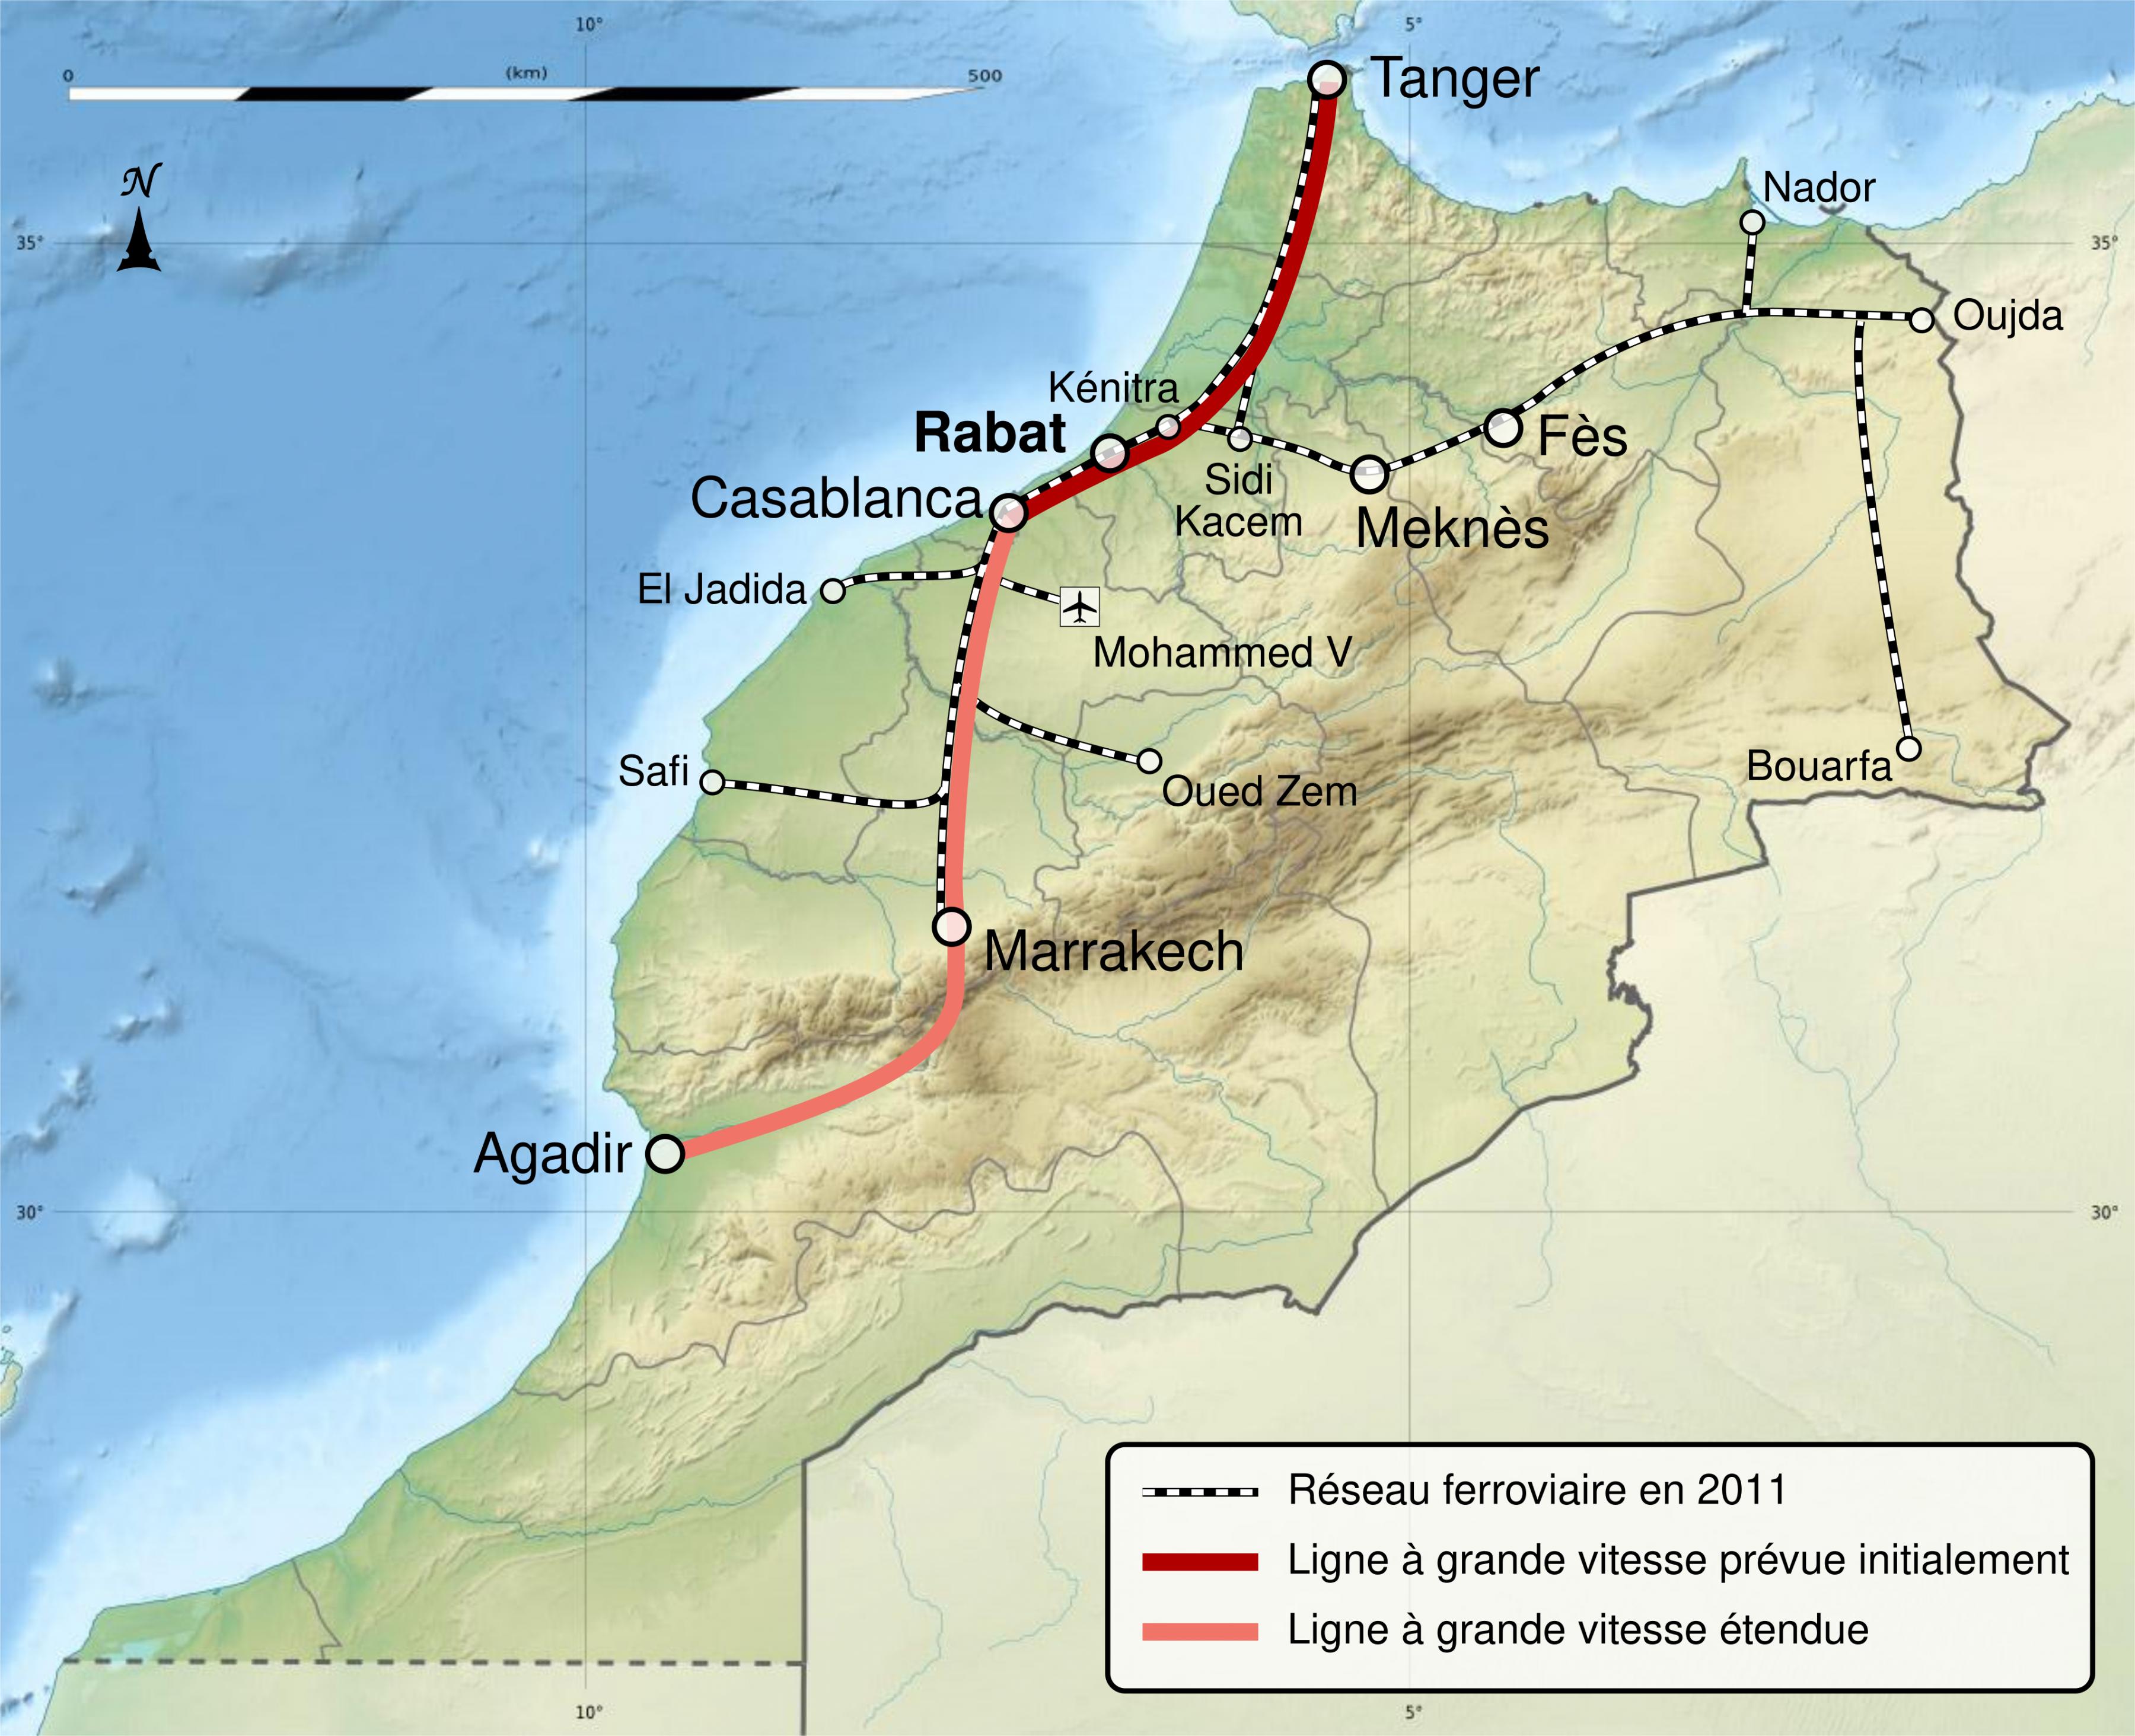 train travel from spain to morocco